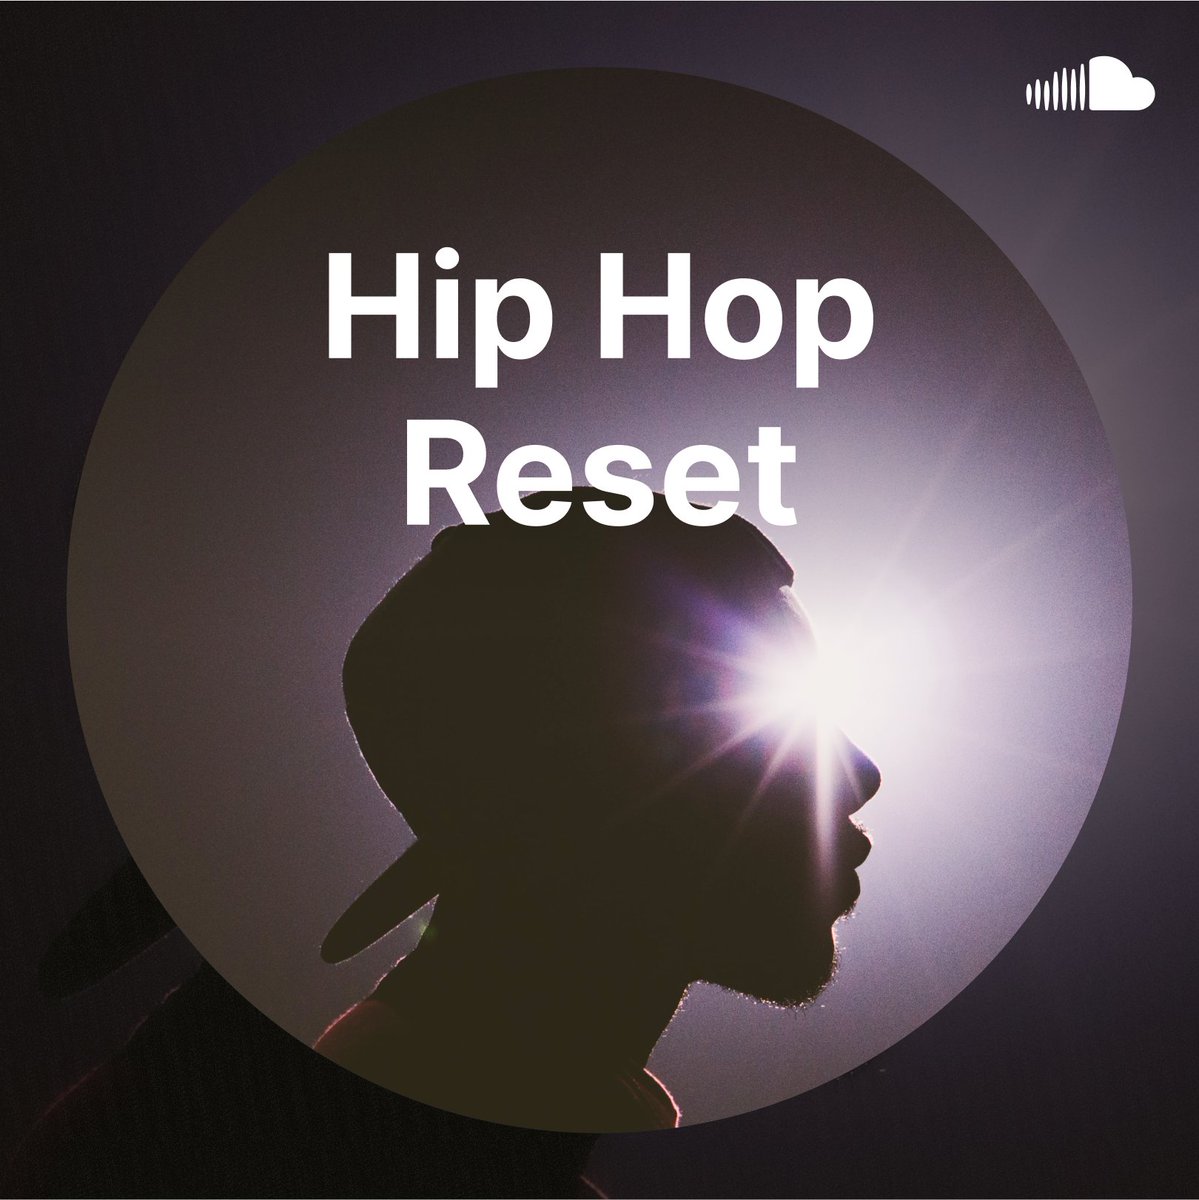 After this weekend, I think we ALL need a little Hip Hop Reset: bit.ly/3y8silM